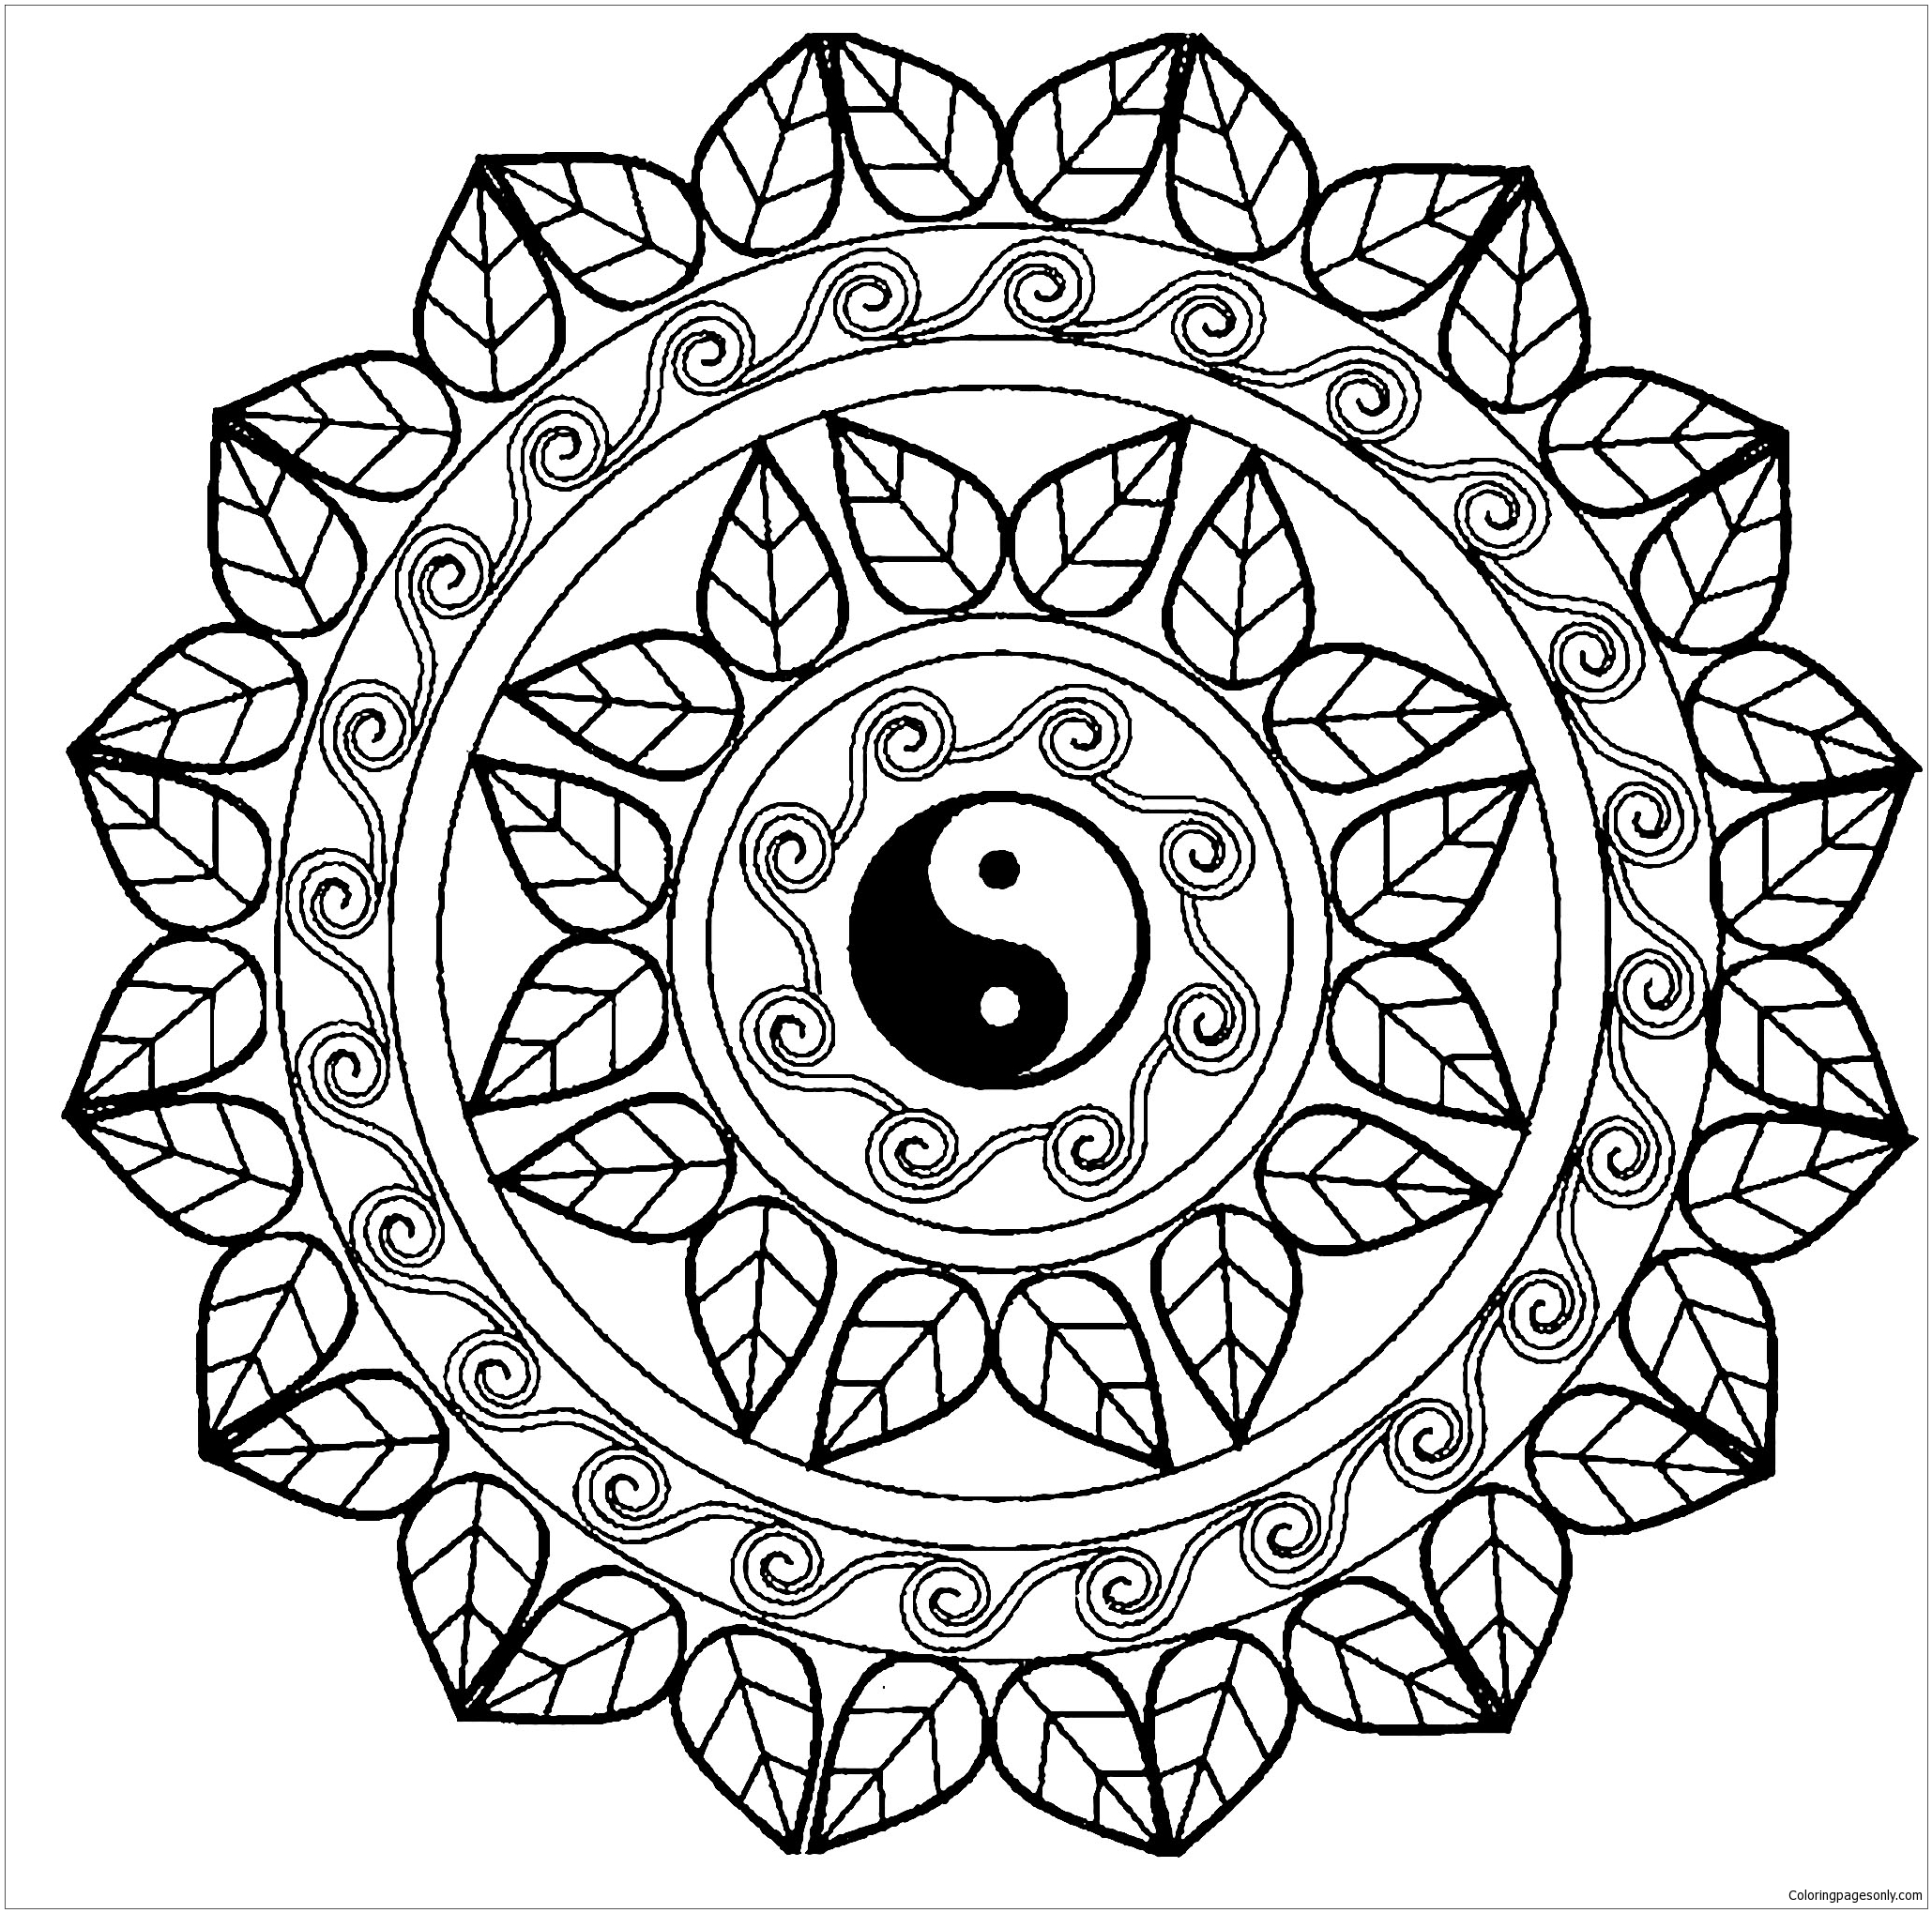 Awesome Flower Mandala Coloring Pages